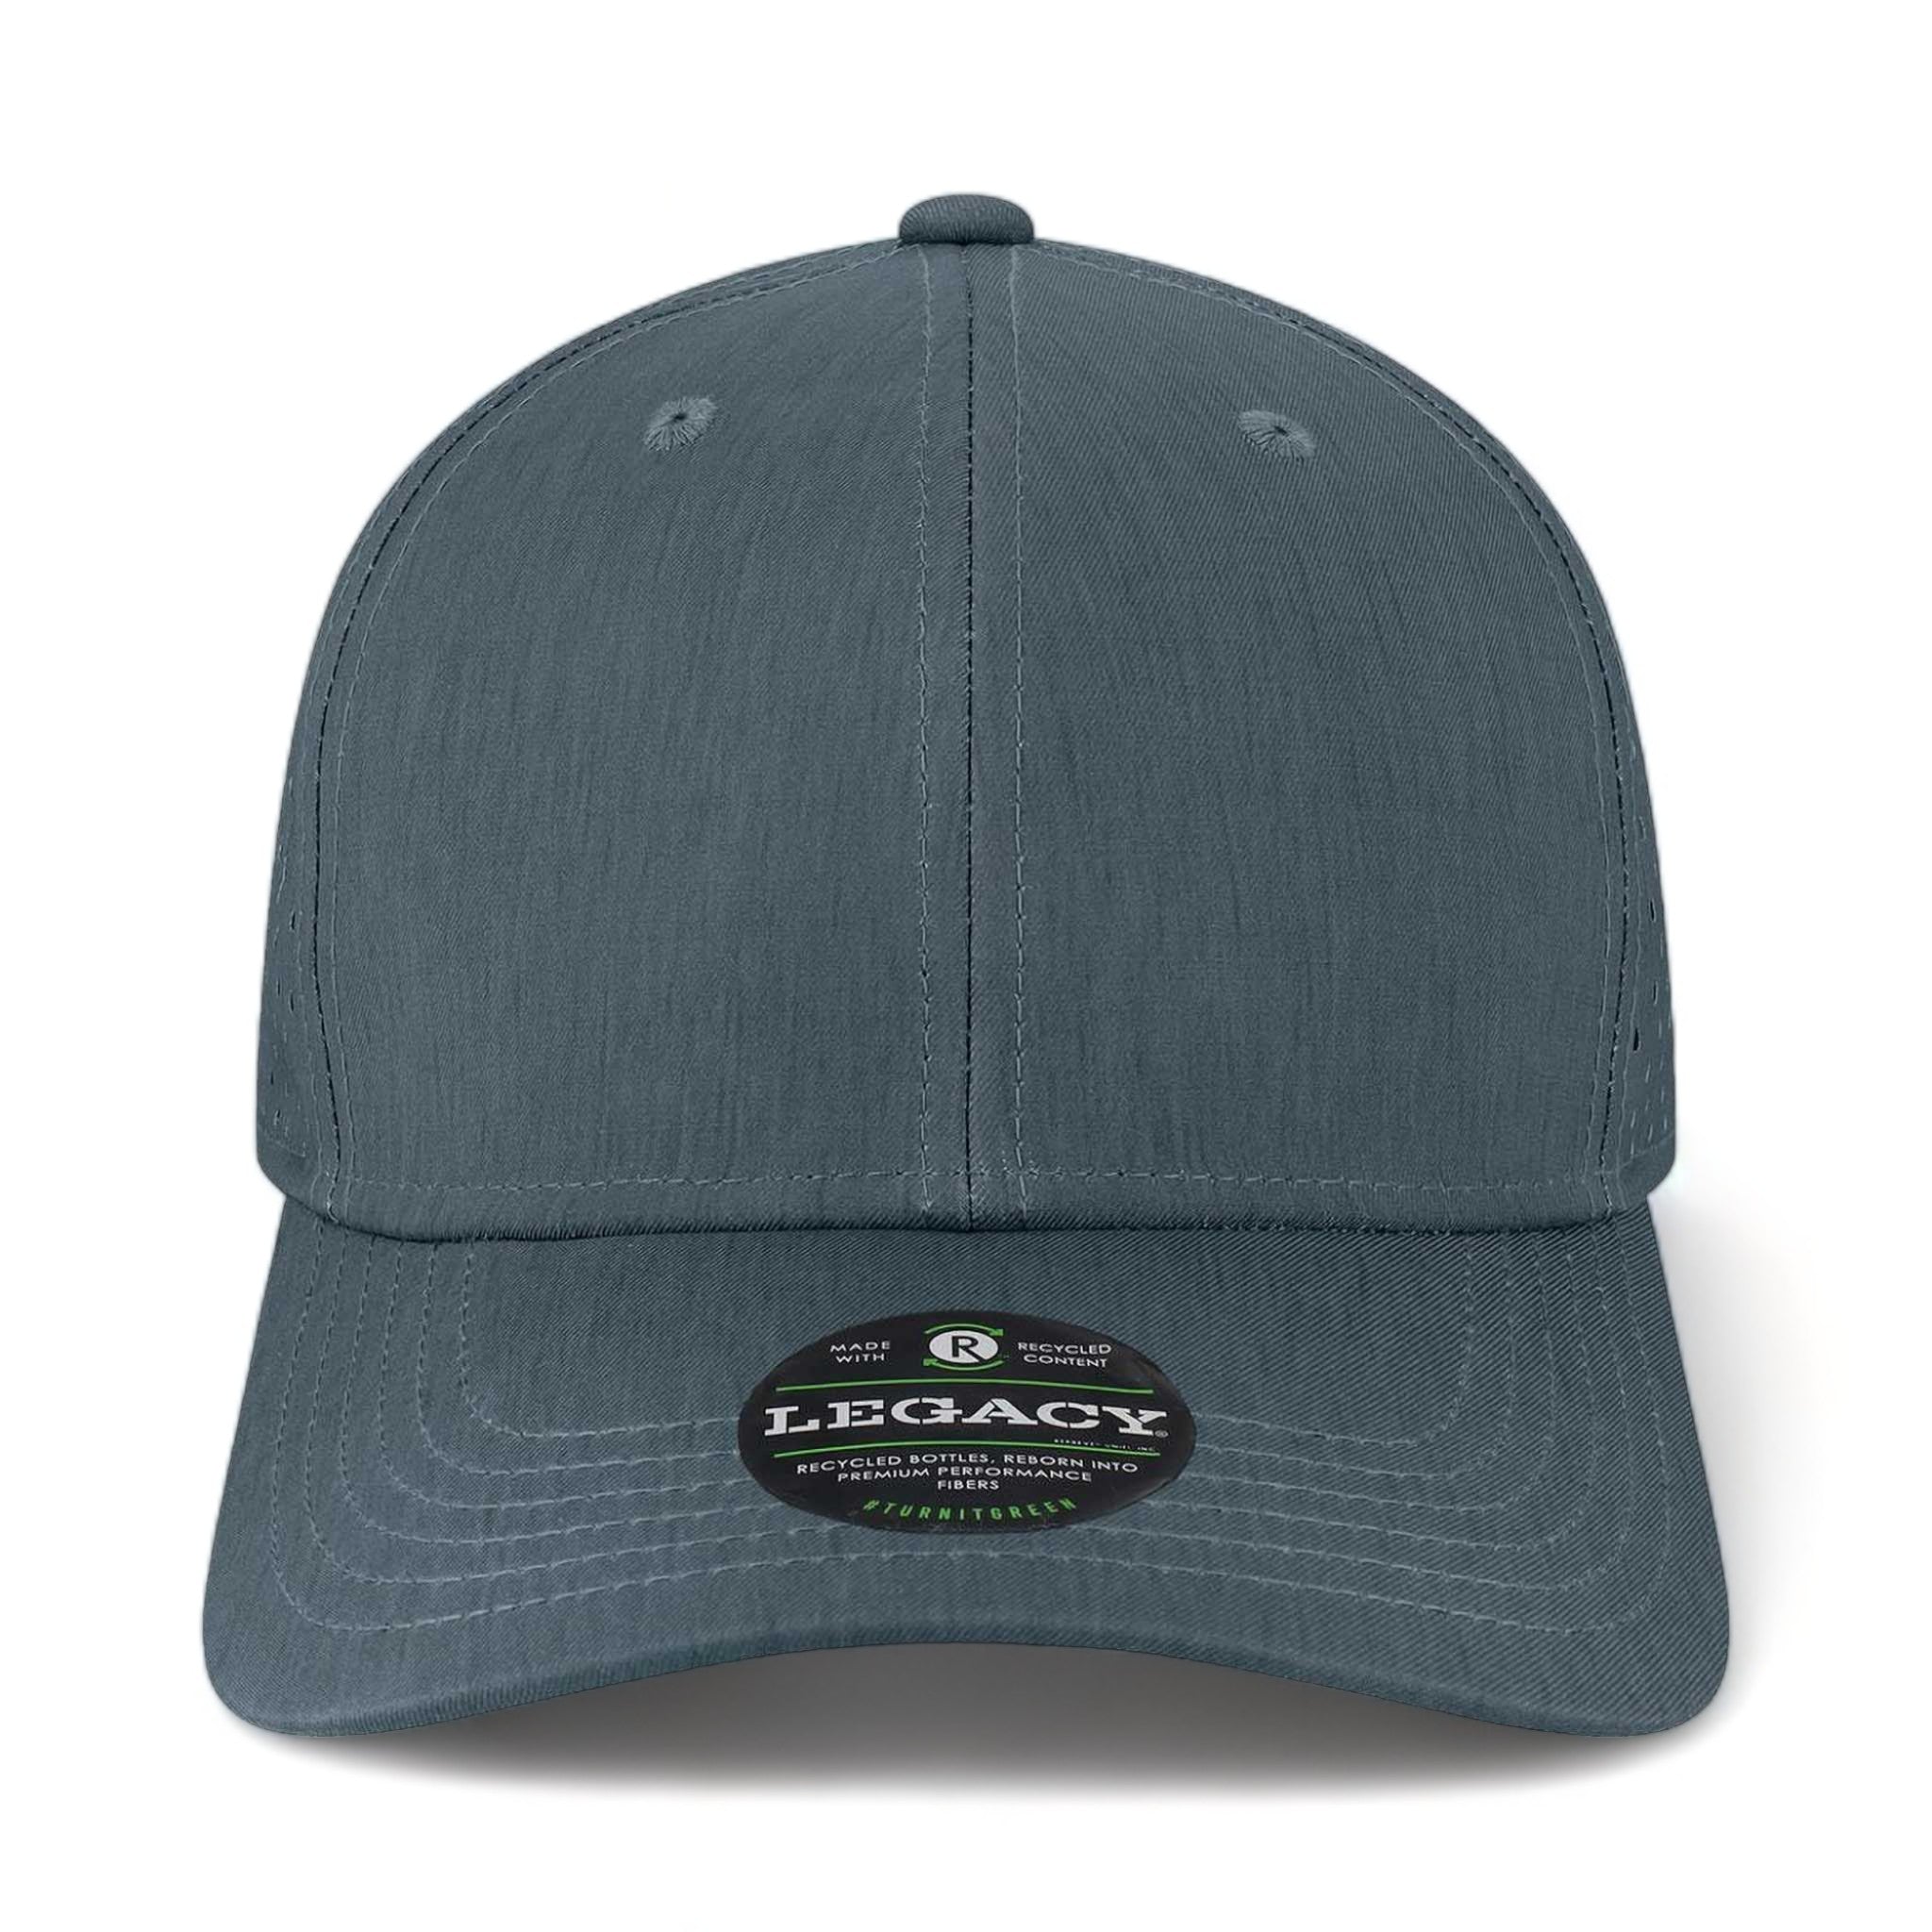 Front view of LEGACY REMPA custom hat in eco navy